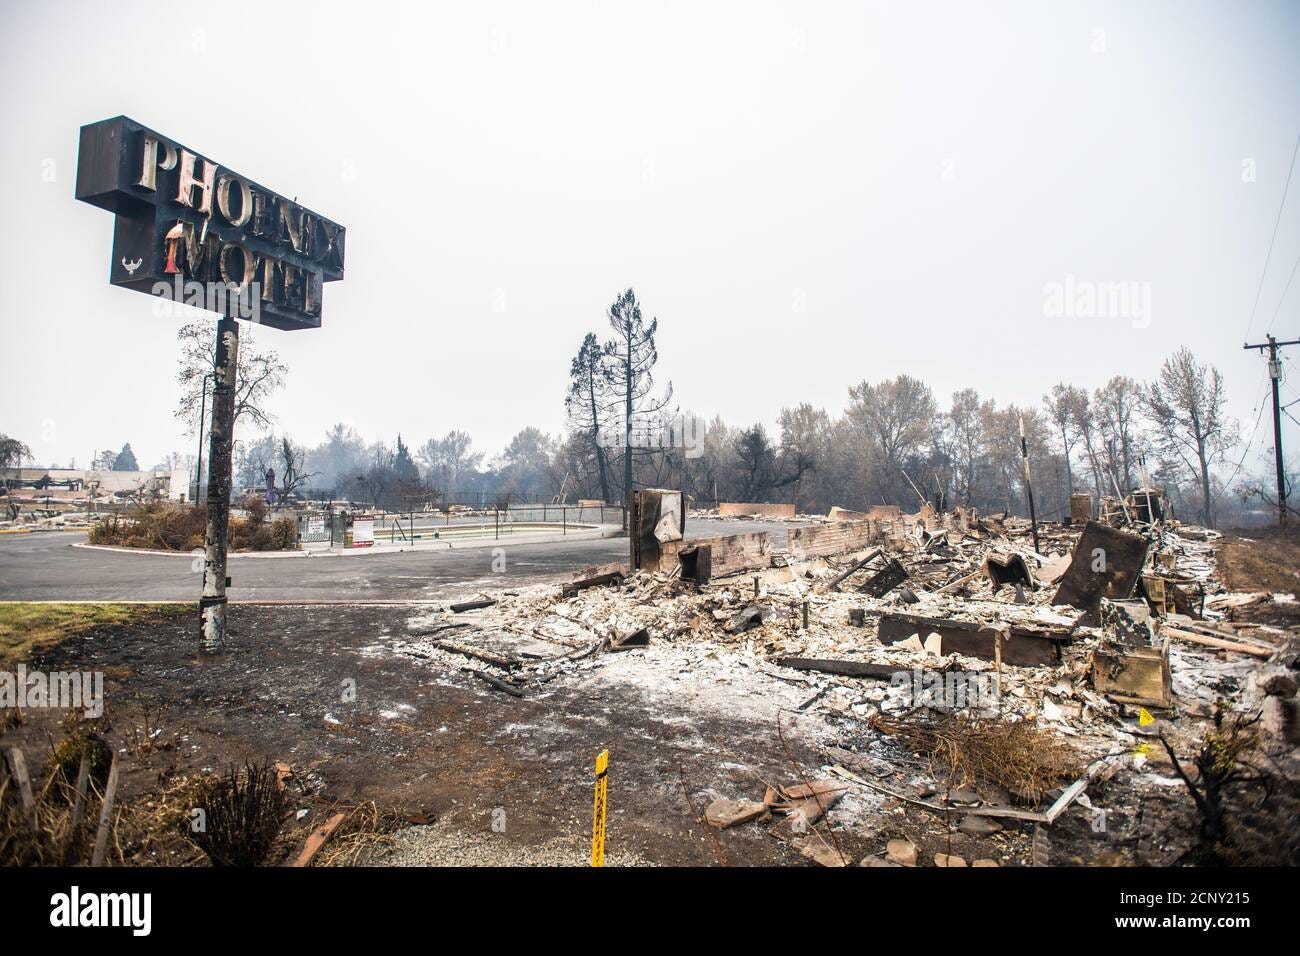 PHOENIX, ORE - SEPTEMBER 18, 2020: A general view of the damage to the Phoenix Motel amid the aftermath of the Almeda Fire. The town of Phoenix, Oregon, showing the burned out